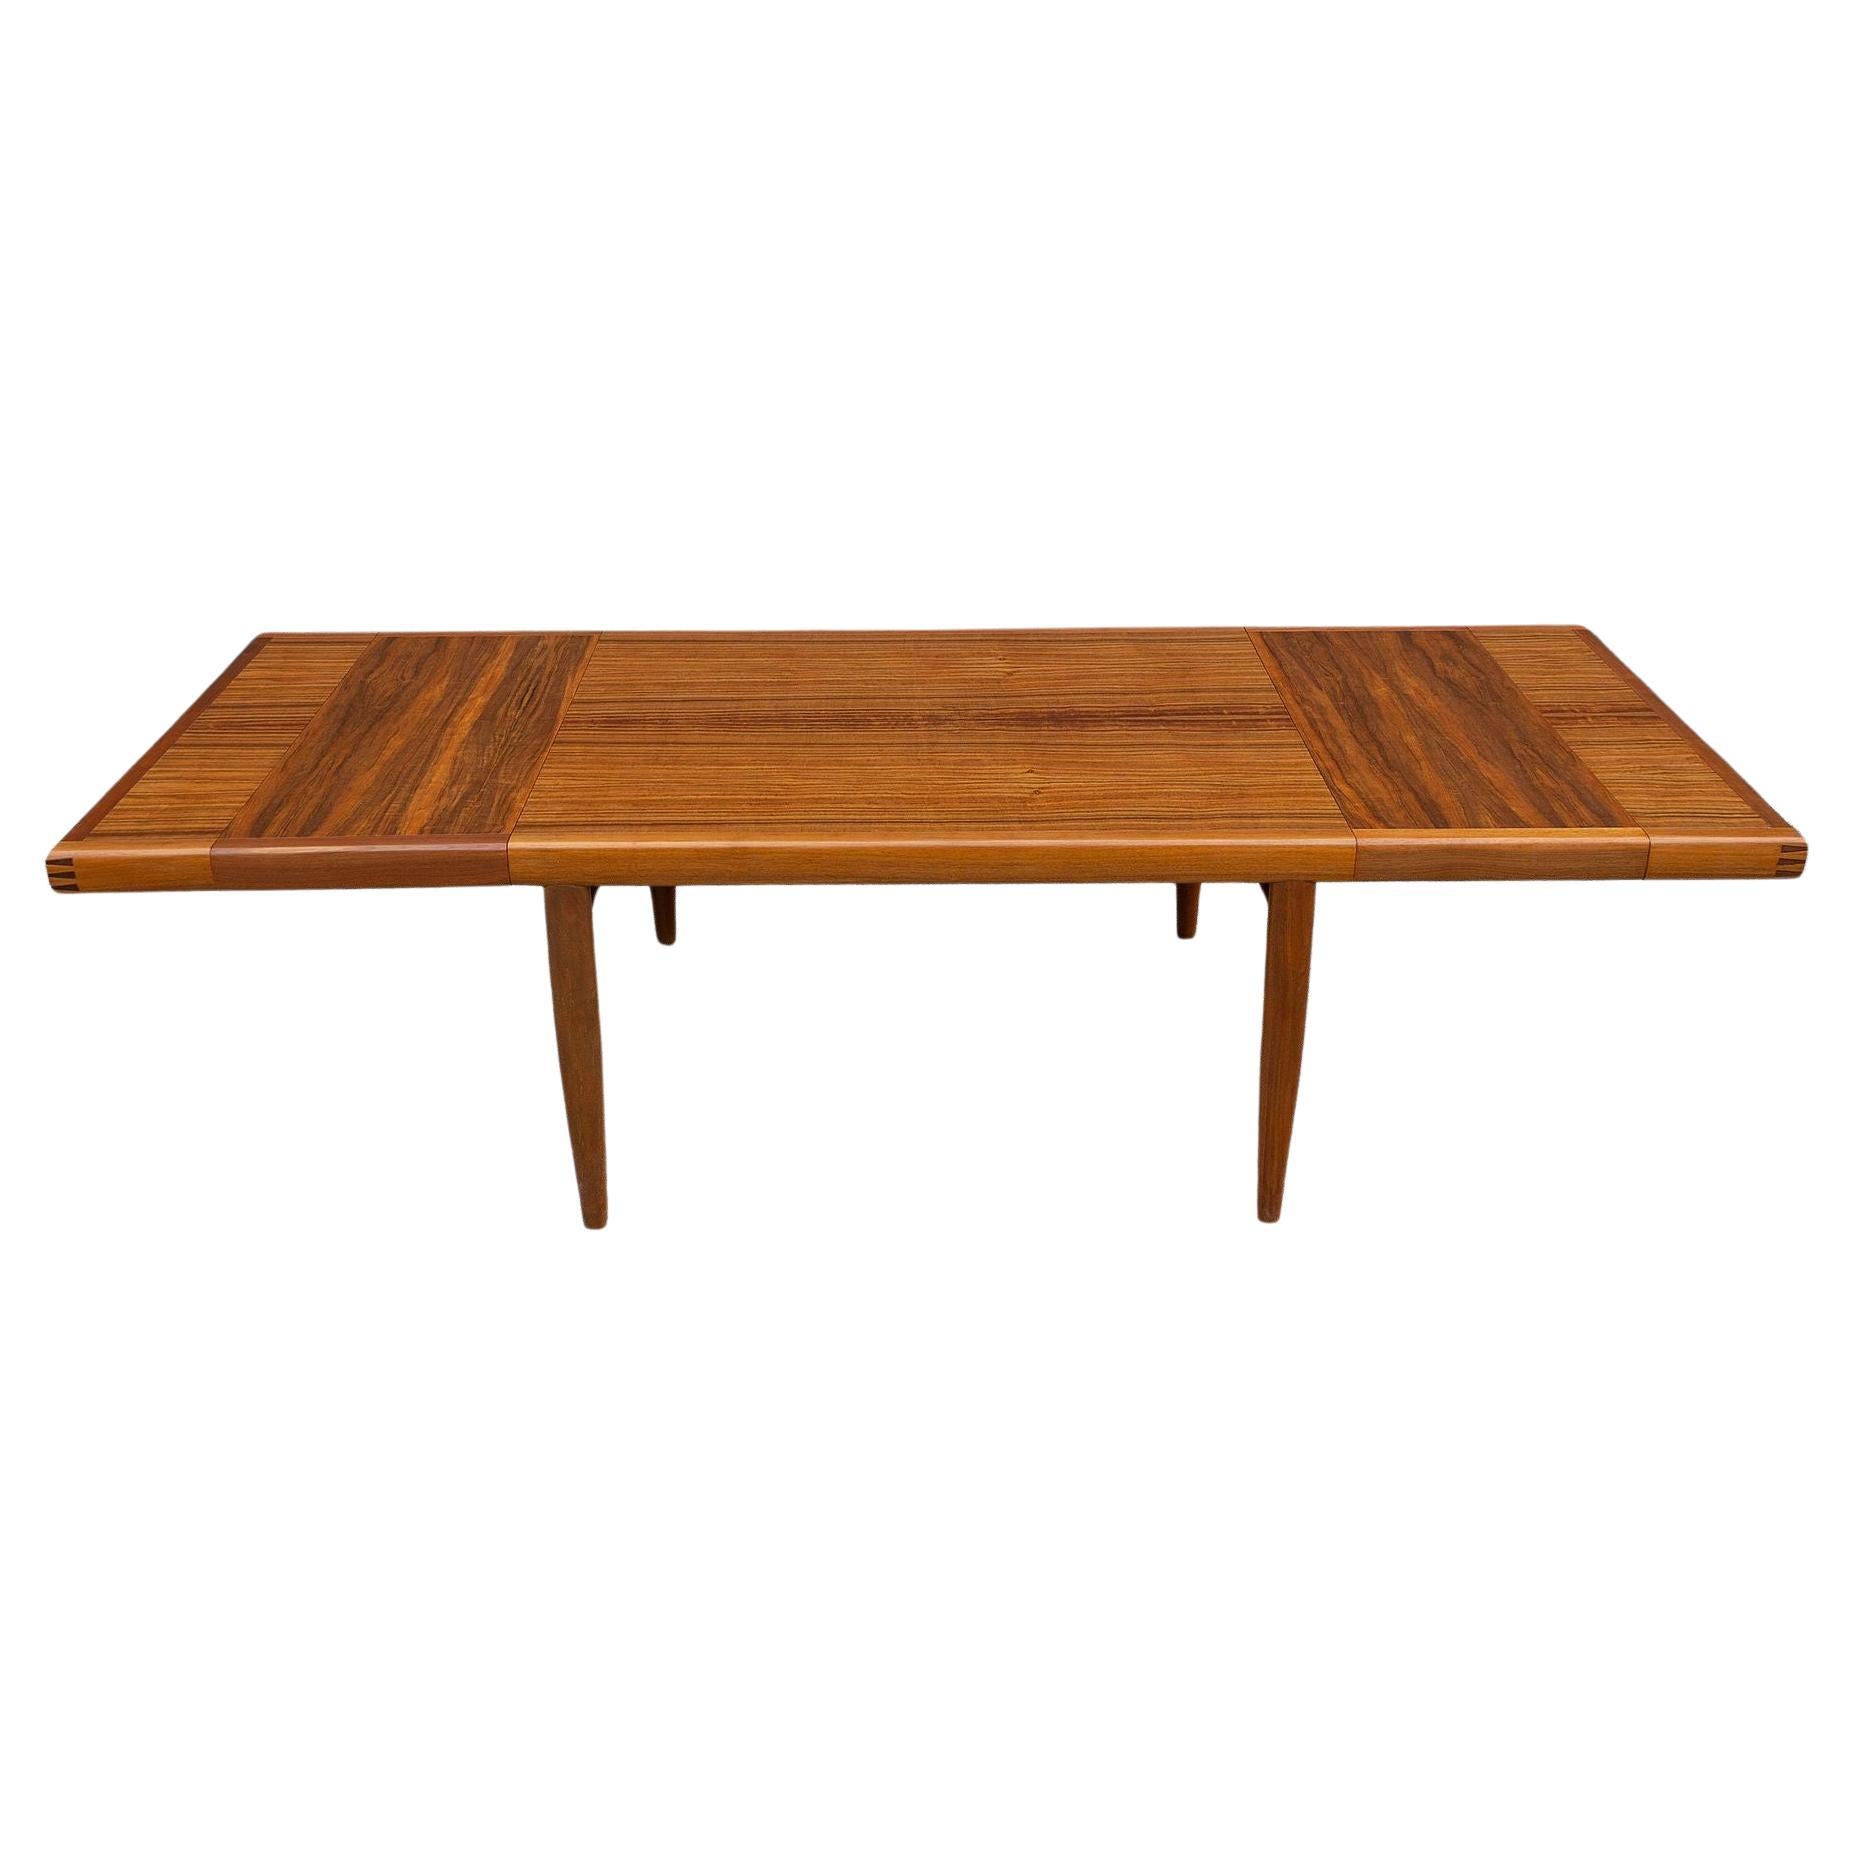 George Nakashima Dining Table with Extensions Widdicomb Origins Collection 1959